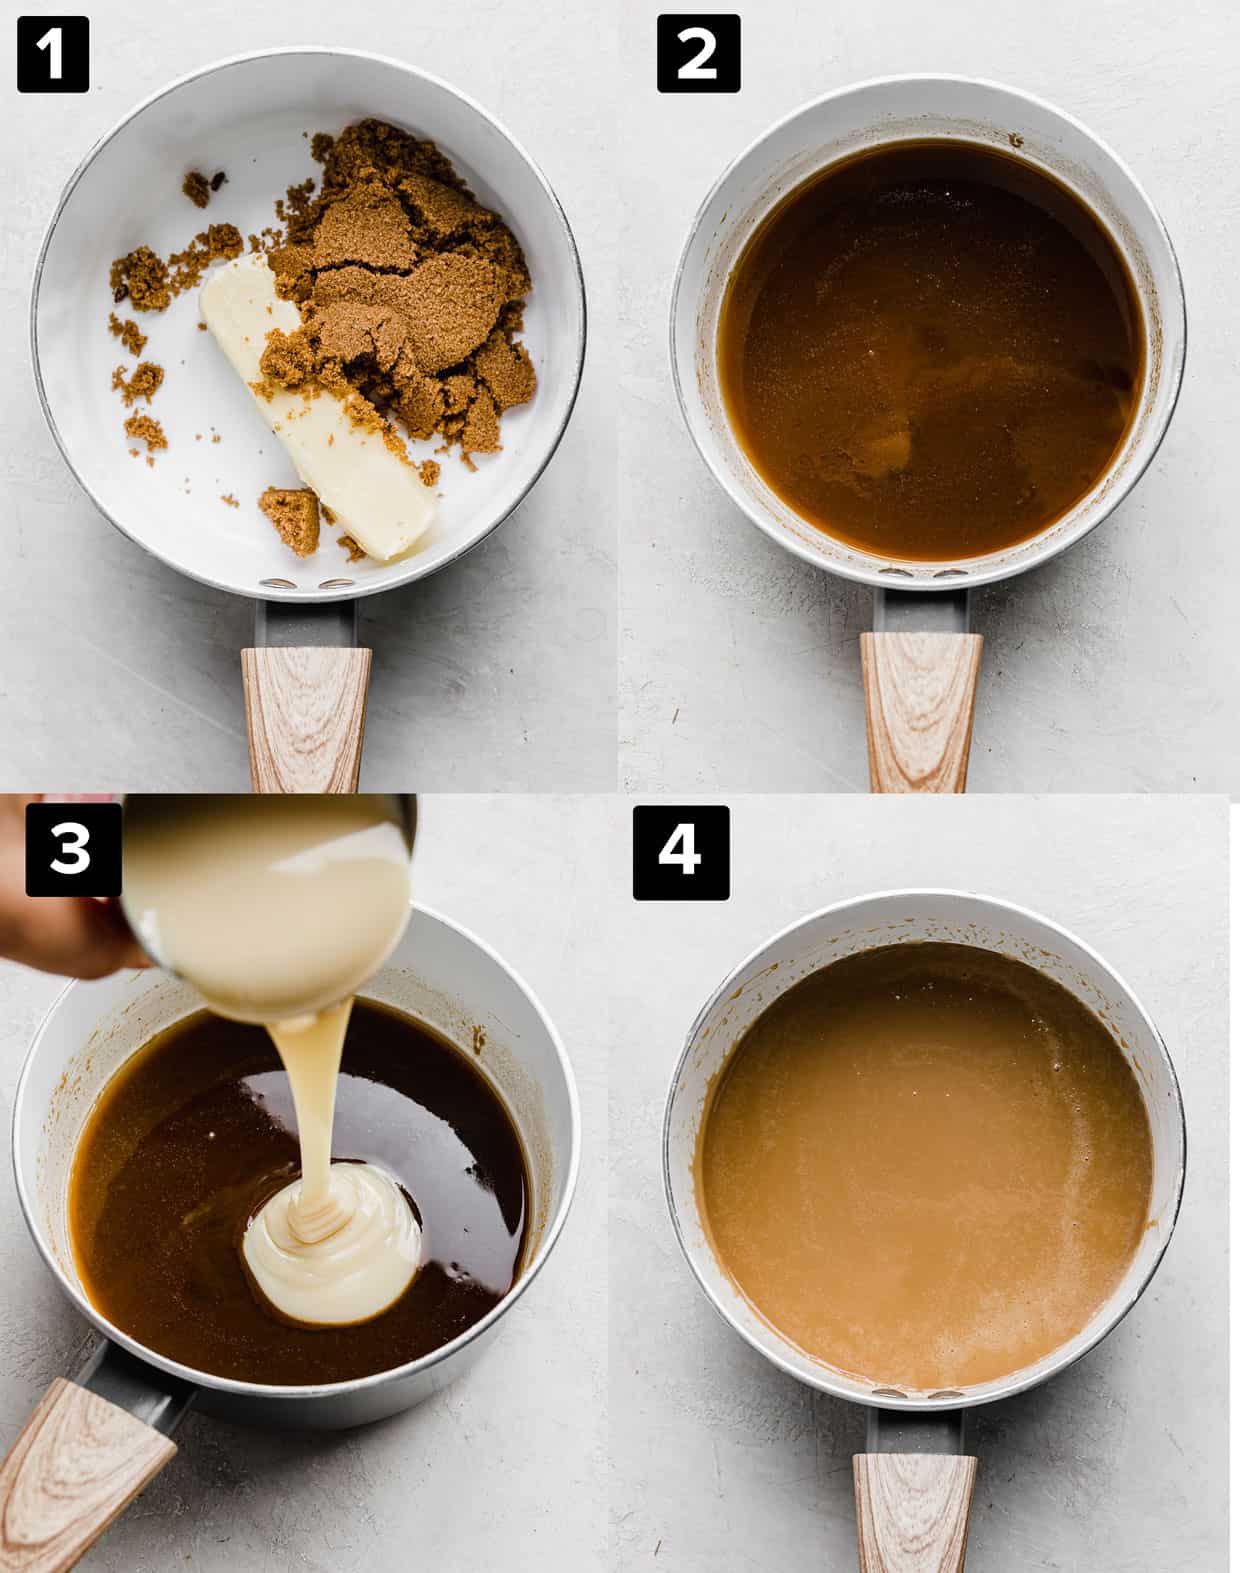 Step-by-step photos showing how to make Banoffee Pie toffee.